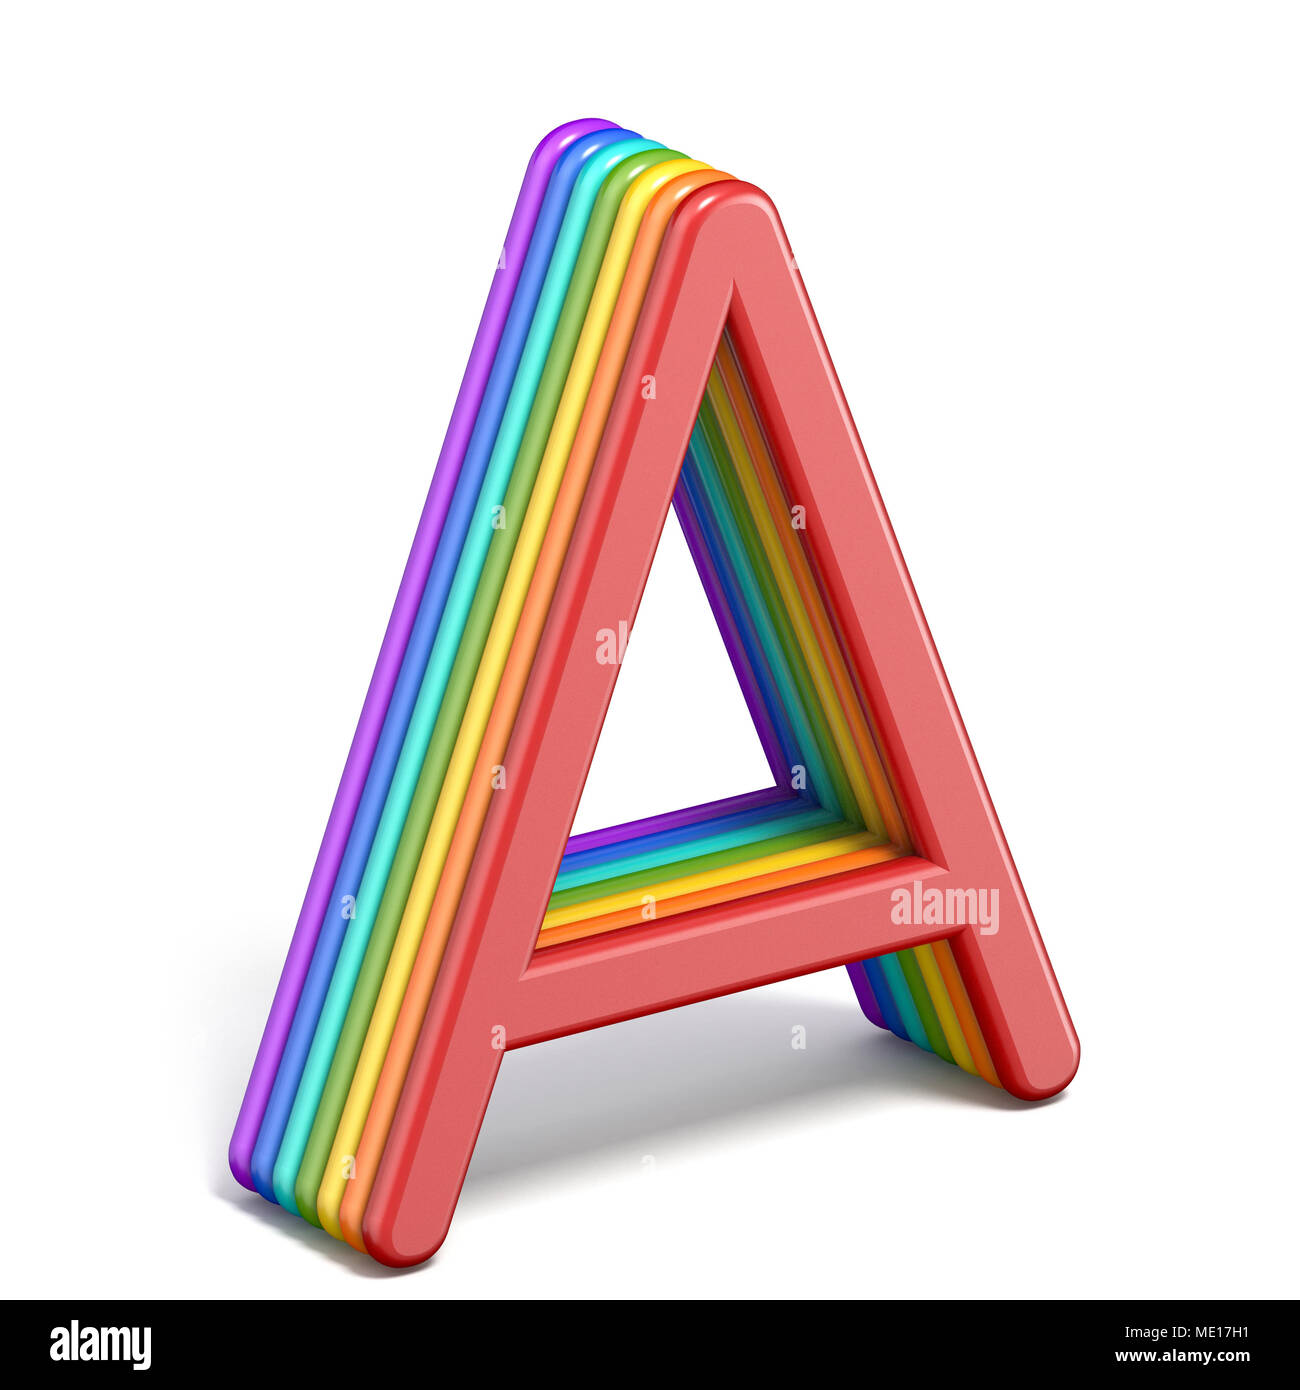 Rainbow font letter A 3D rendering illustration isolated on white background Stock Photo